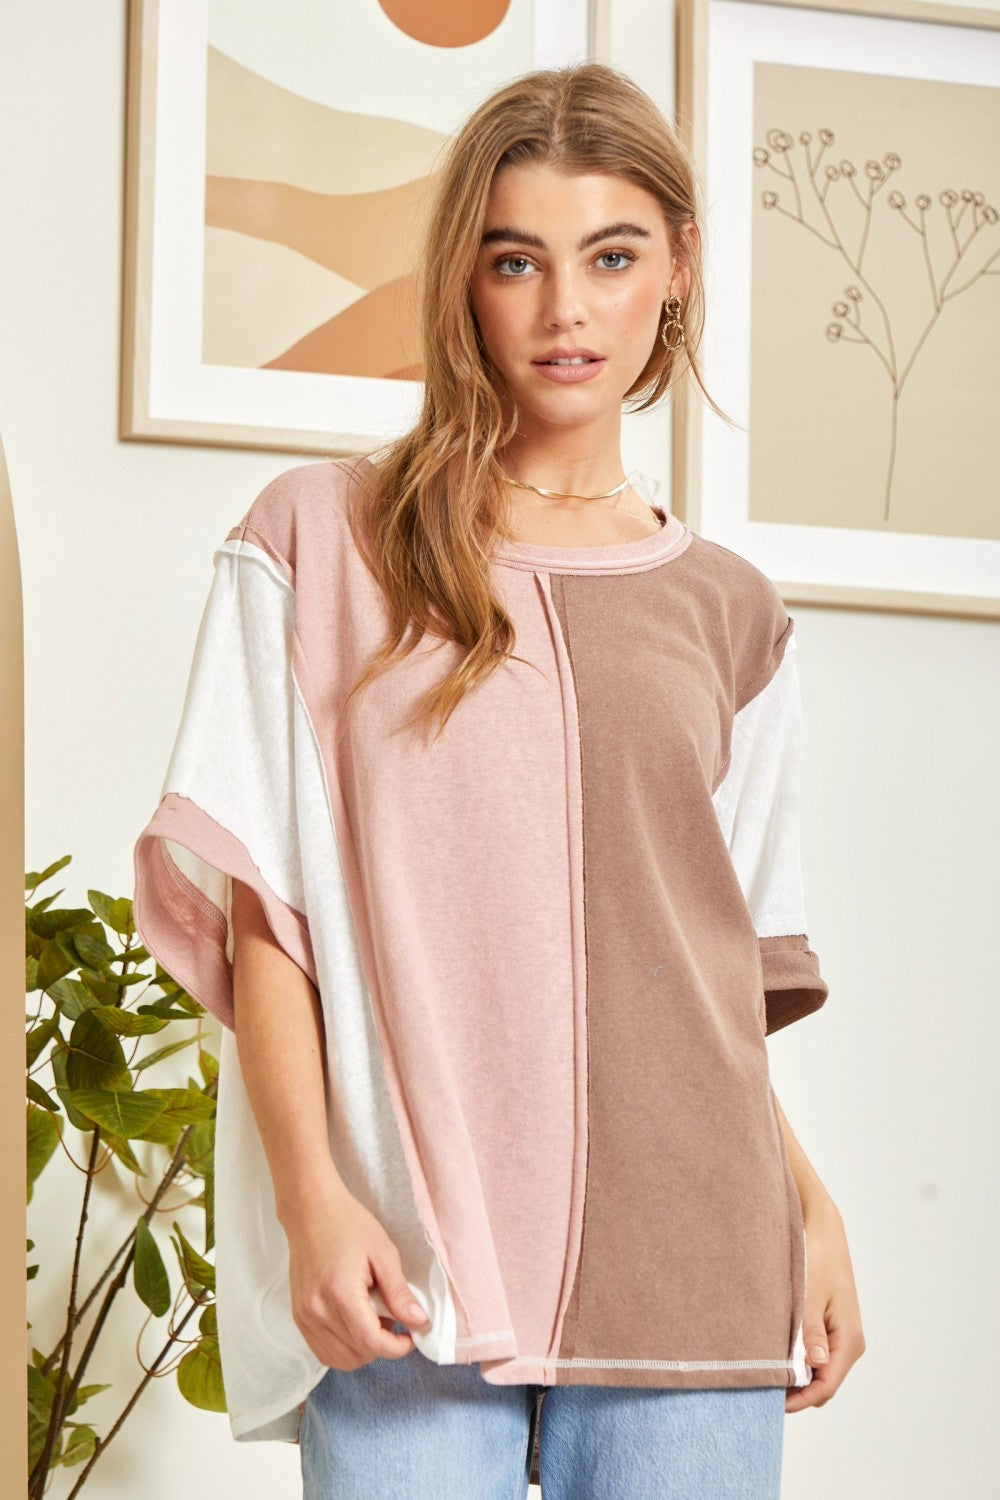 Half Sleeve Colorblocked Top in Mauve-Mocha by Andree by Unit